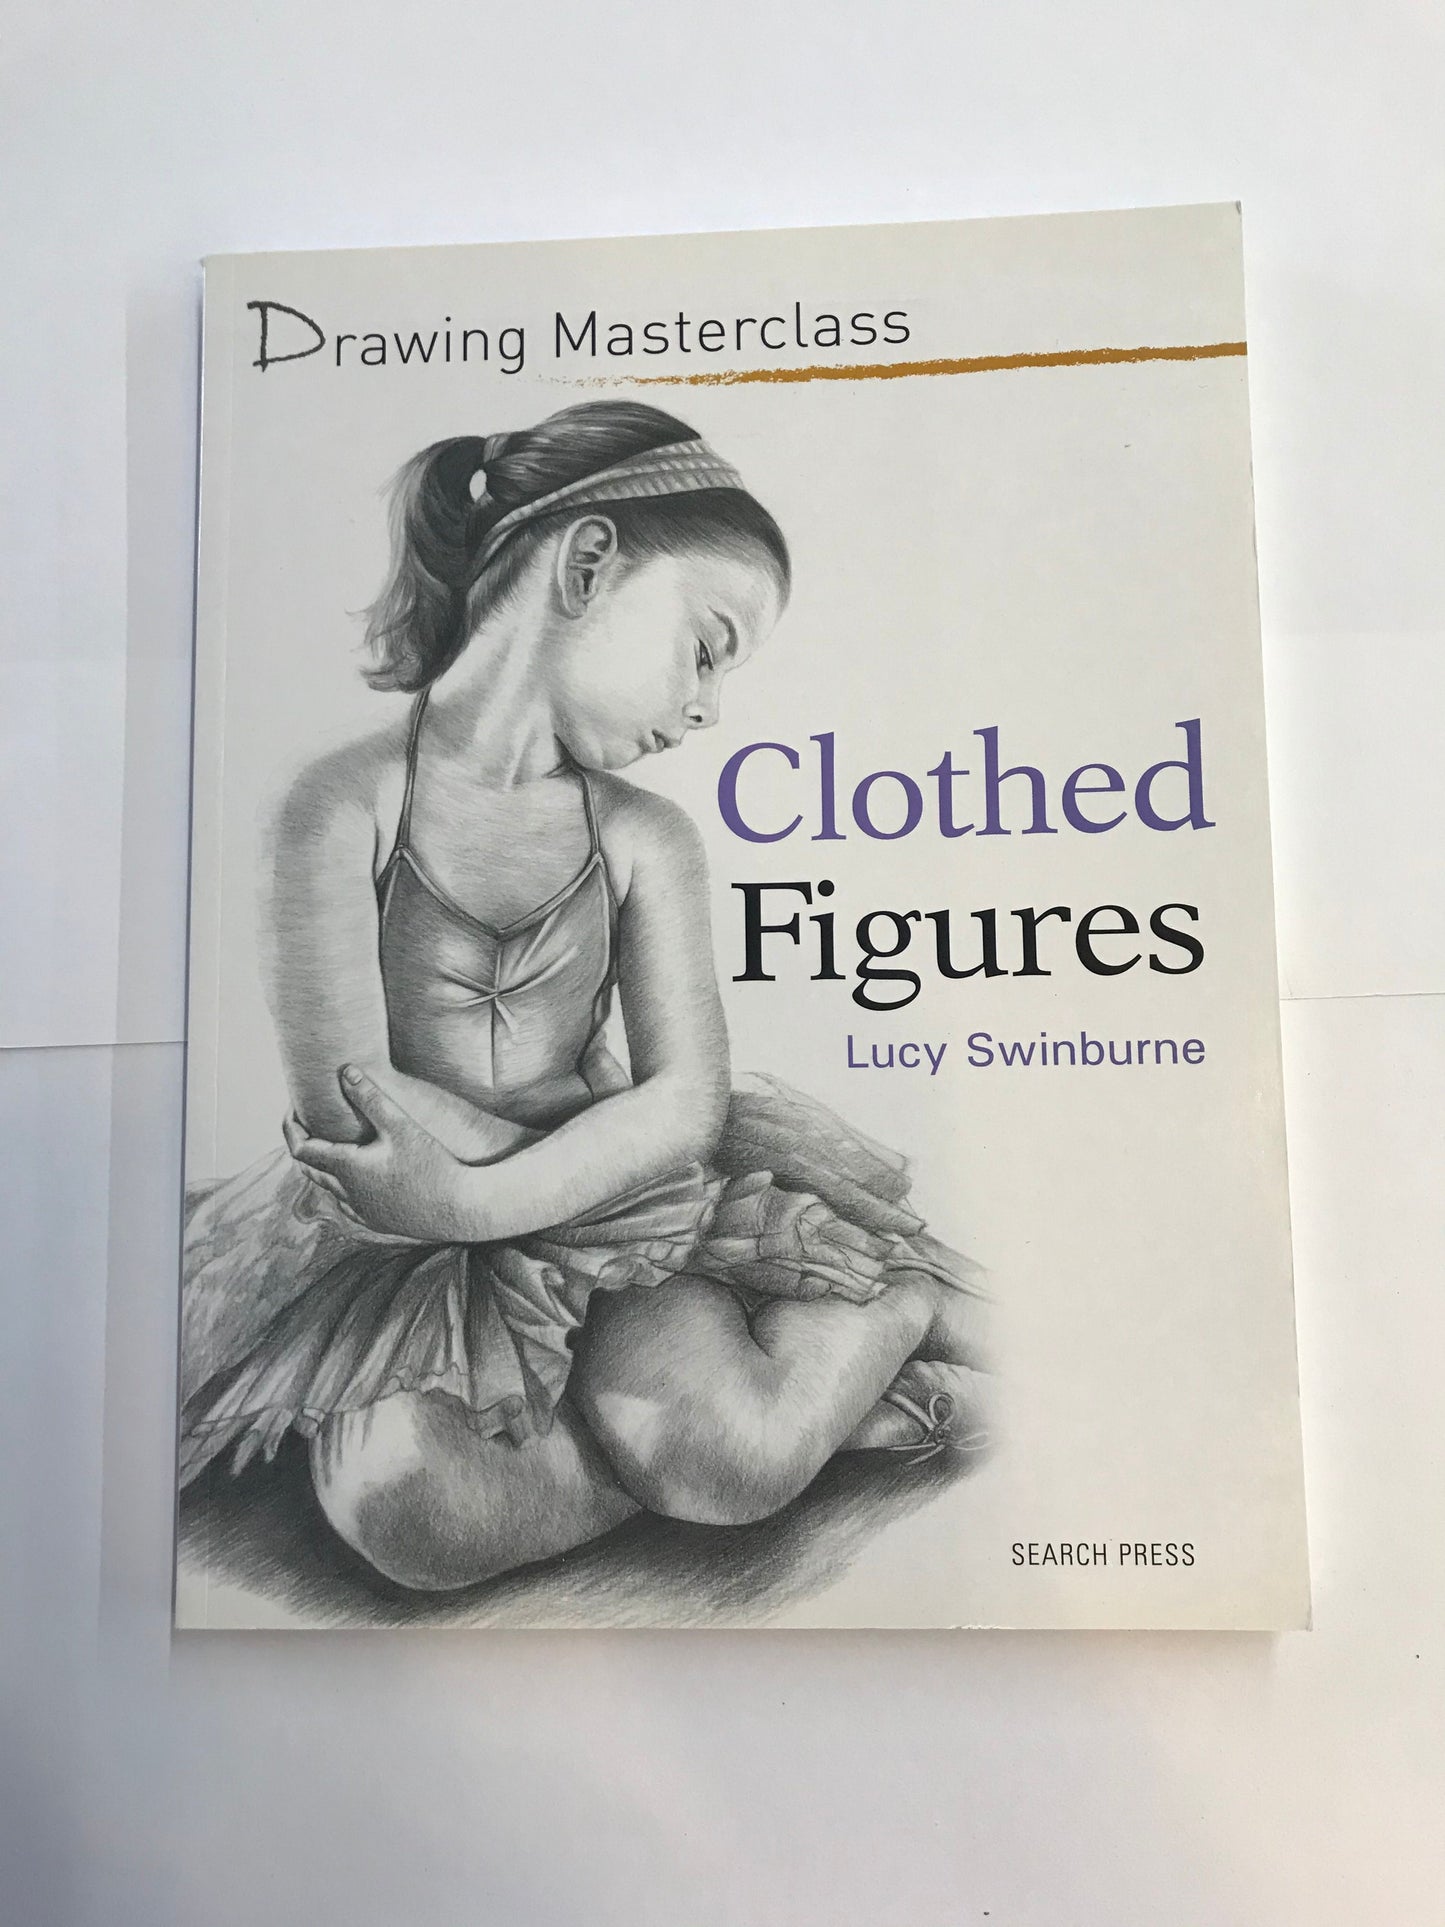 Drawing Masterclass - Clothed Figures